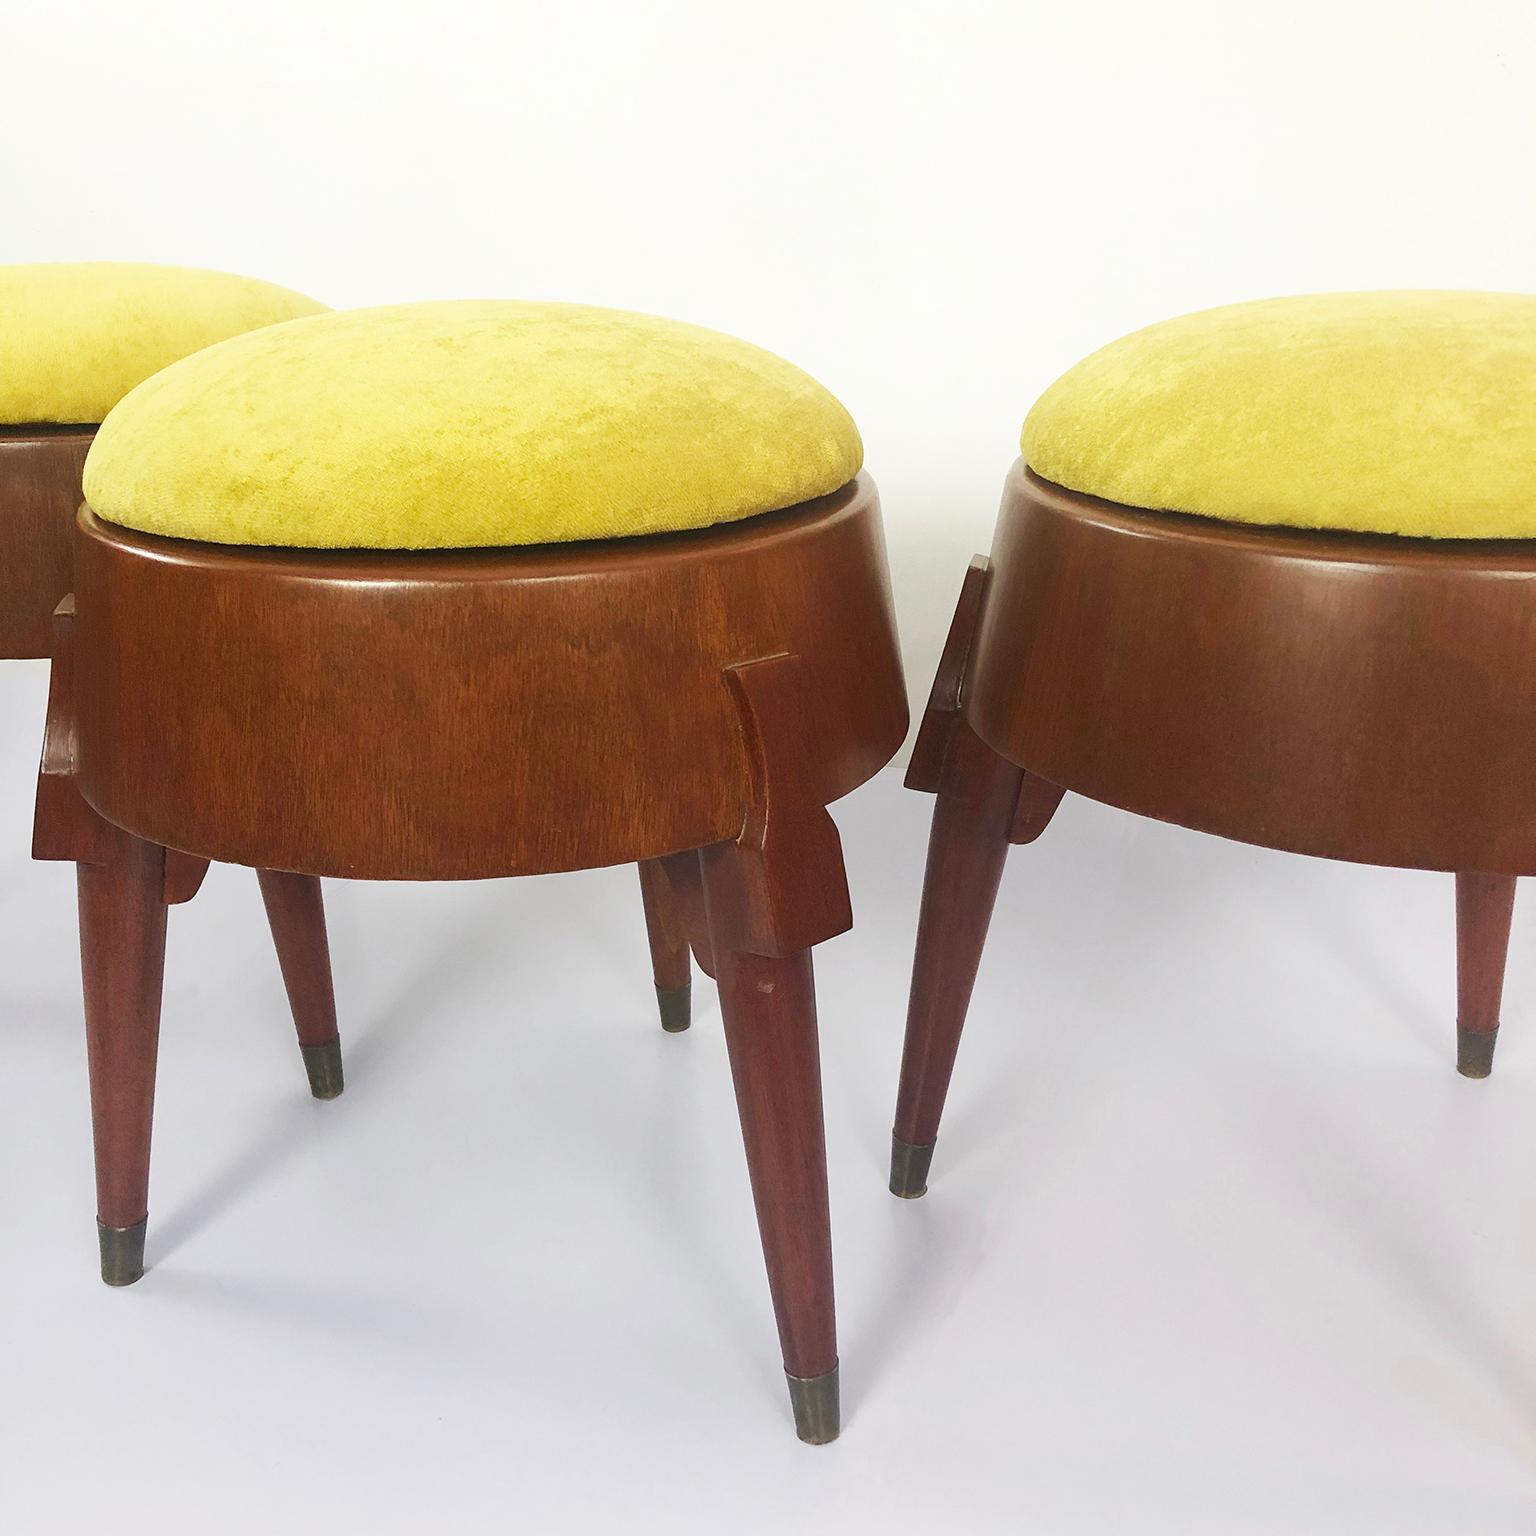 We offer this set of midcentury Mexican stools attributed to Eugenio Escudero, recently restored, circa 1950.